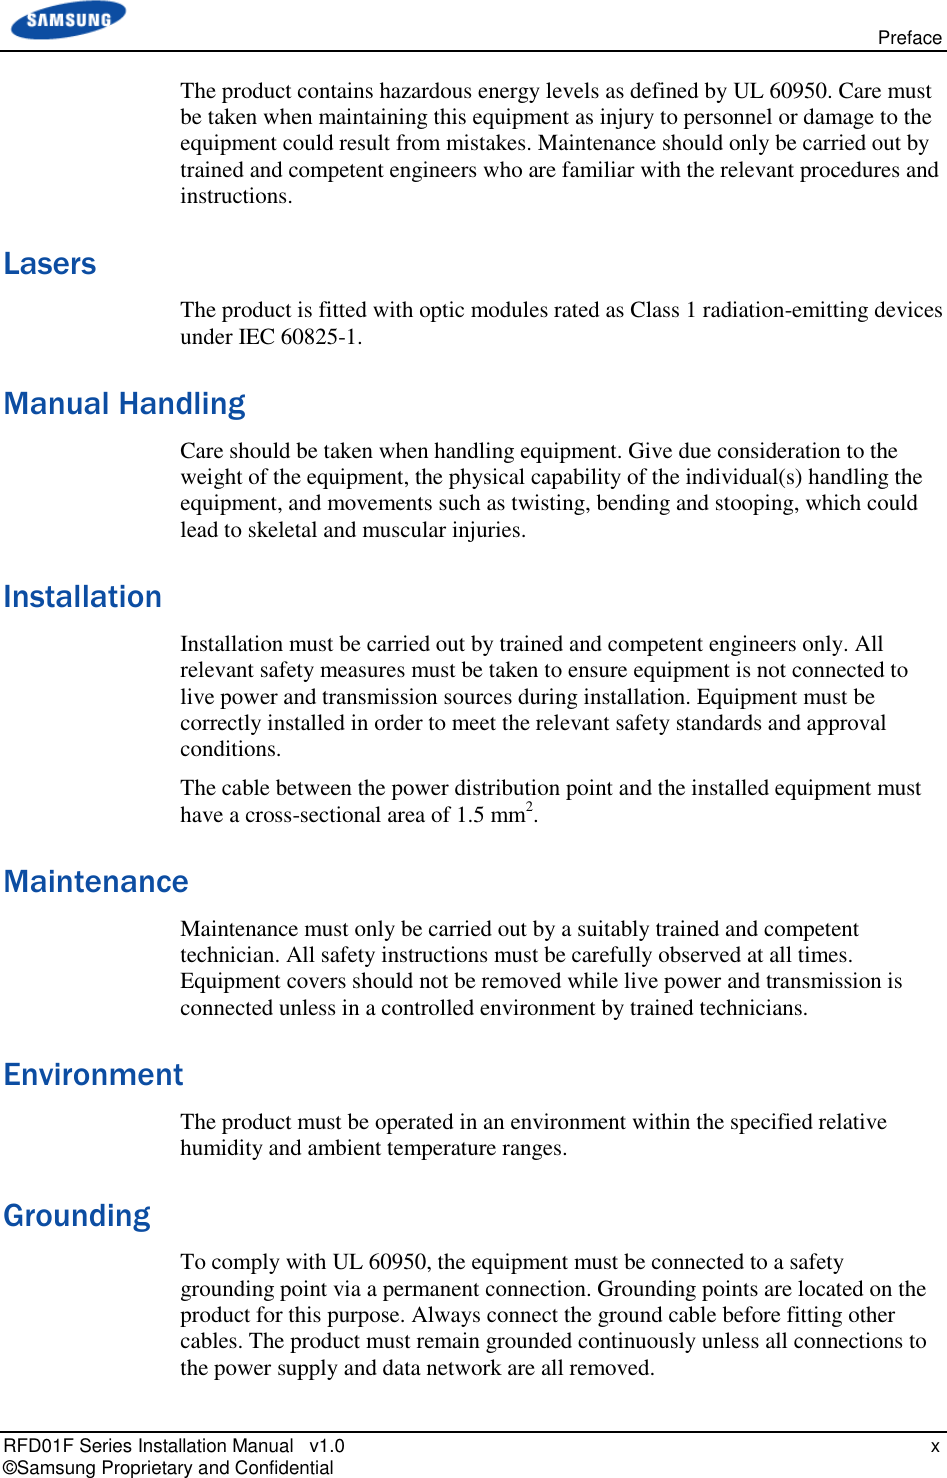   Preface RFD01F Series Installation Manual   v1.0    x © Samsung Proprietary and Confidential The product contains hazardous energy levels as defined by UL 60950. Care must be taken when maintaining this equipment as injury to personnel or damage to the equipment could result from mistakes. Maintenance should only be carried out by trained and competent engineers who are familiar with the relevant procedures and instructions. Lasers The product is fitted with optic modules rated as Class 1 radiation-emitting devices under IEC 60825-1.  Manual Handling Care should be taken when handling equipment. Give due consideration to the weight of the equipment, the physical capability of the individual(s) handling the equipment, and movements such as twisting, bending and stooping, which could lead to skeletal and muscular injuries. Installation Installation must be carried out by trained and competent engineers only. All relevant safety measures must be taken to ensure equipment is not connected to live power and transmission sources during installation. Equipment must be correctly installed in order to meet the relevant safety standards and approval conditions. The cable between the power distribution point and the installed equipment must have a cross-sectional area of 1.5 mm2. Maintenance Maintenance must only be carried out by a suitably trained and competent technician. All safety instructions must be carefully observed at all times. Equipment covers should not be removed while live power and transmission is connected unless in a controlled environment by trained technicians. Environment The product must be operated in an environment within the specified relative humidity and ambient temperature ranges.  Grounding To comply with UL 60950, the equipment must be connected to a safety grounding point via a permanent connection. Grounding points are located on the product for this purpose. Always connect the ground cable before fitting other cables. The product must remain grounded continuously unless all connections to the power supply and data network are all removed. 